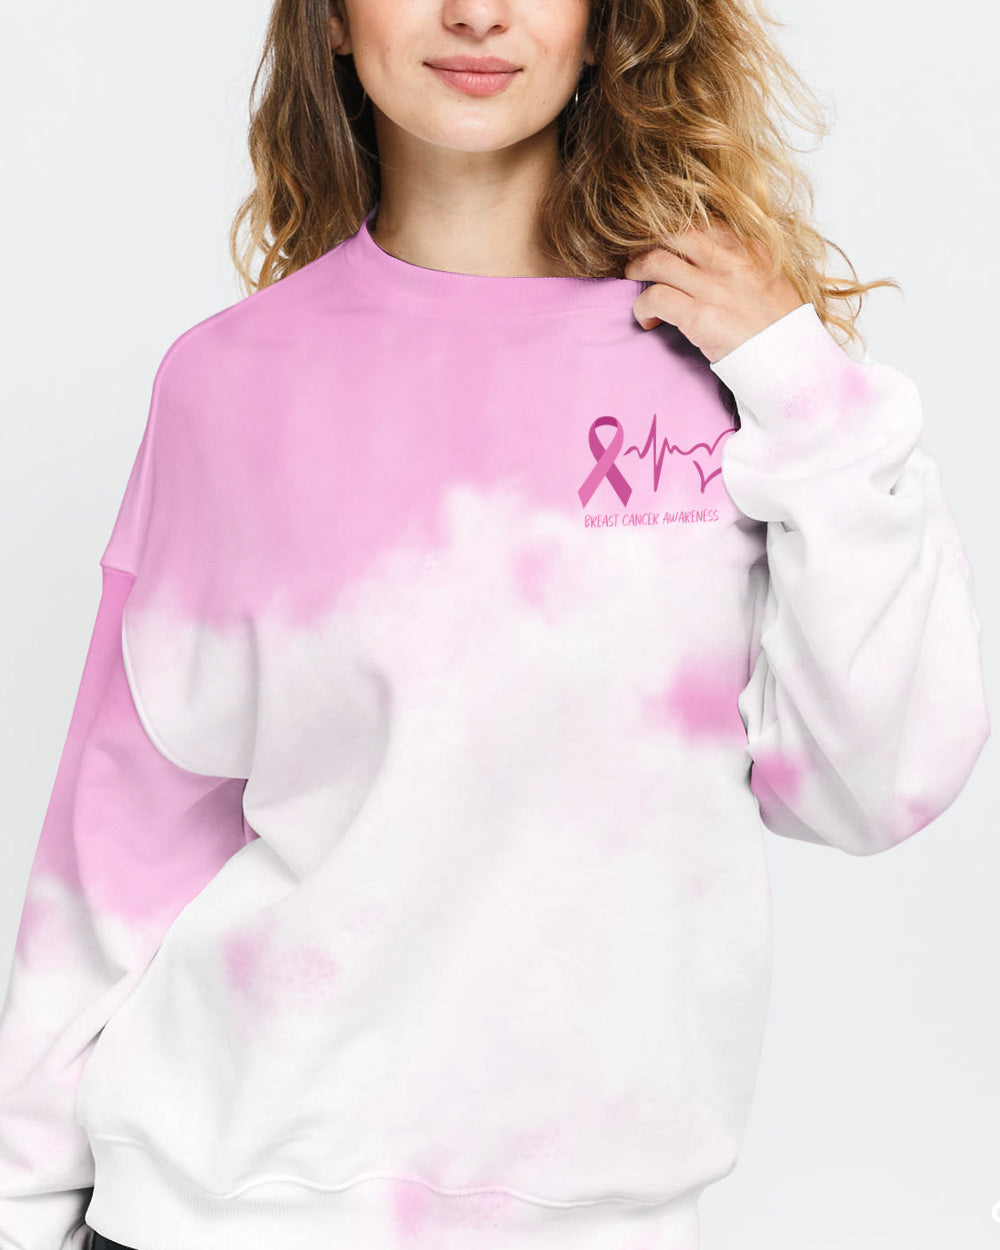 Hope For A Cure Butterfly Women's Breast Cancer Awareness Sweatshirt